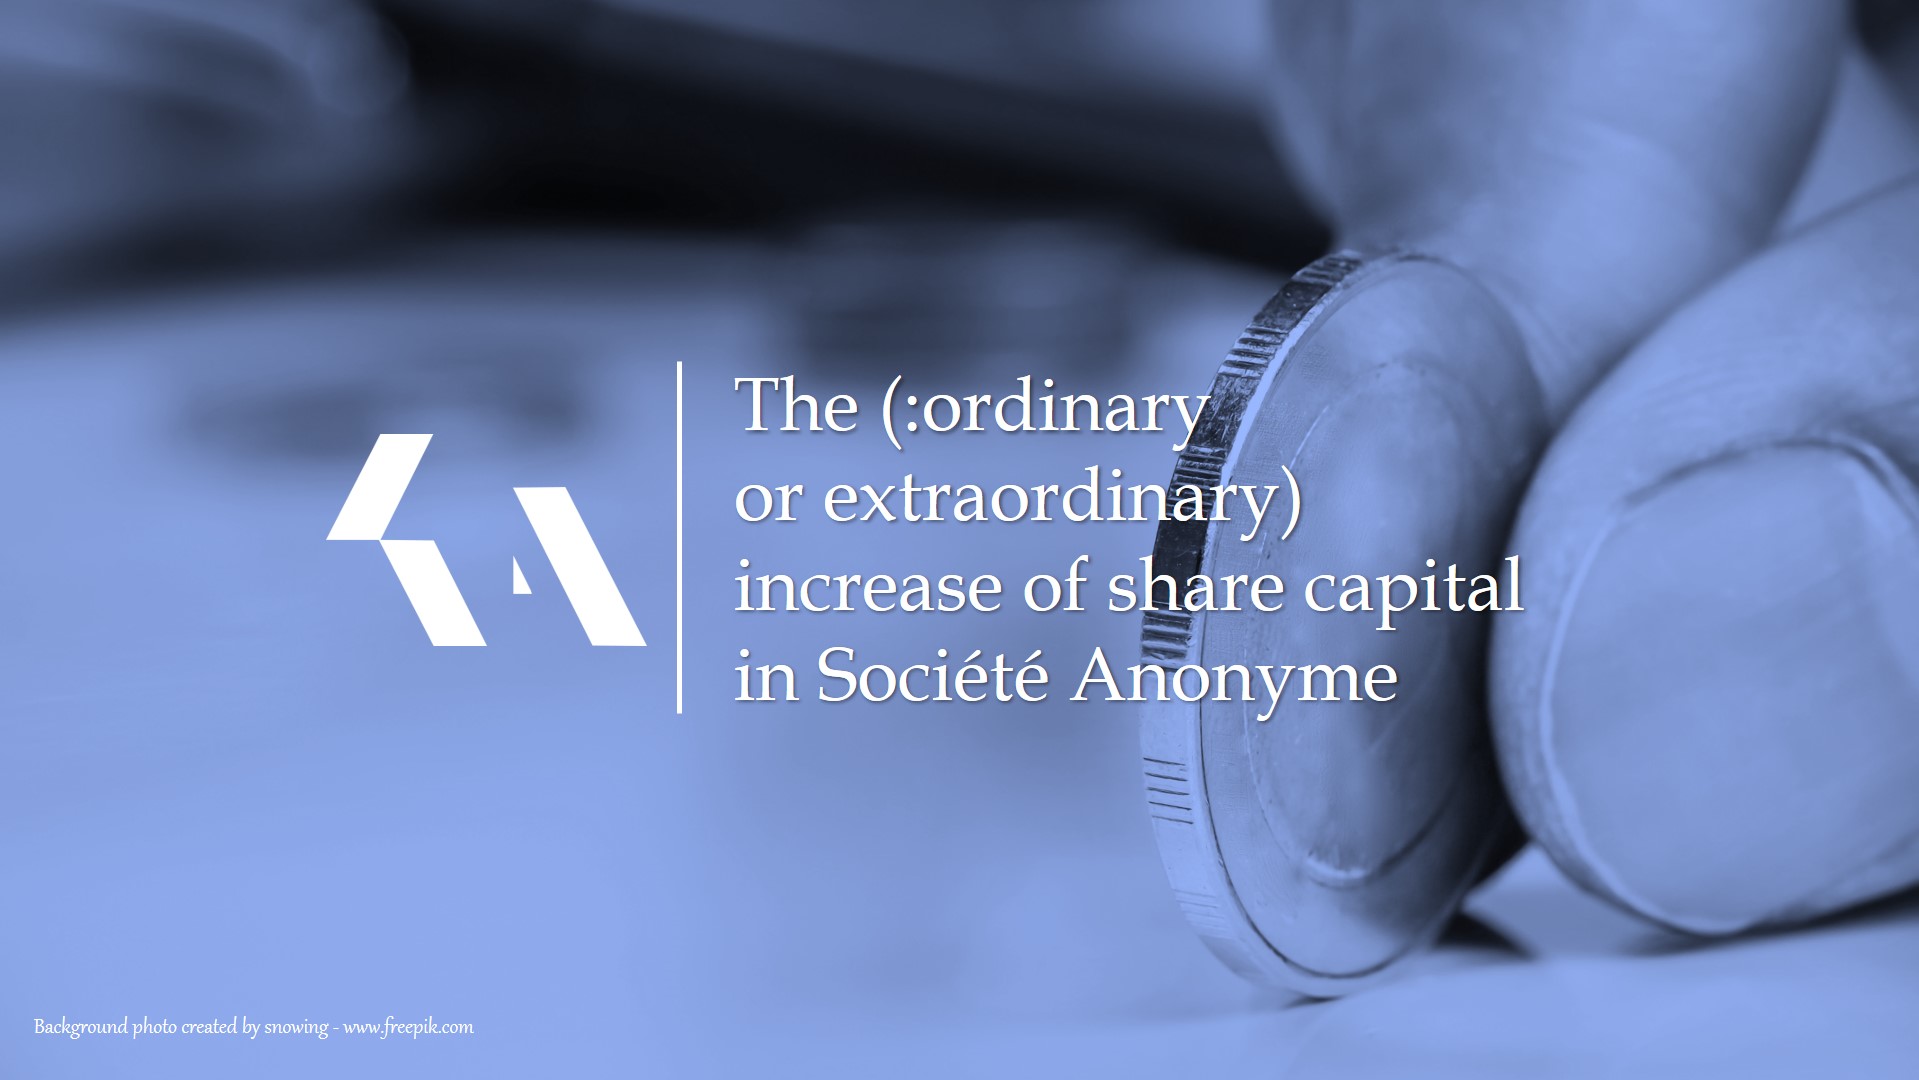 The (:ordinary or extraordinary) increase of share capital in Société Anonyme